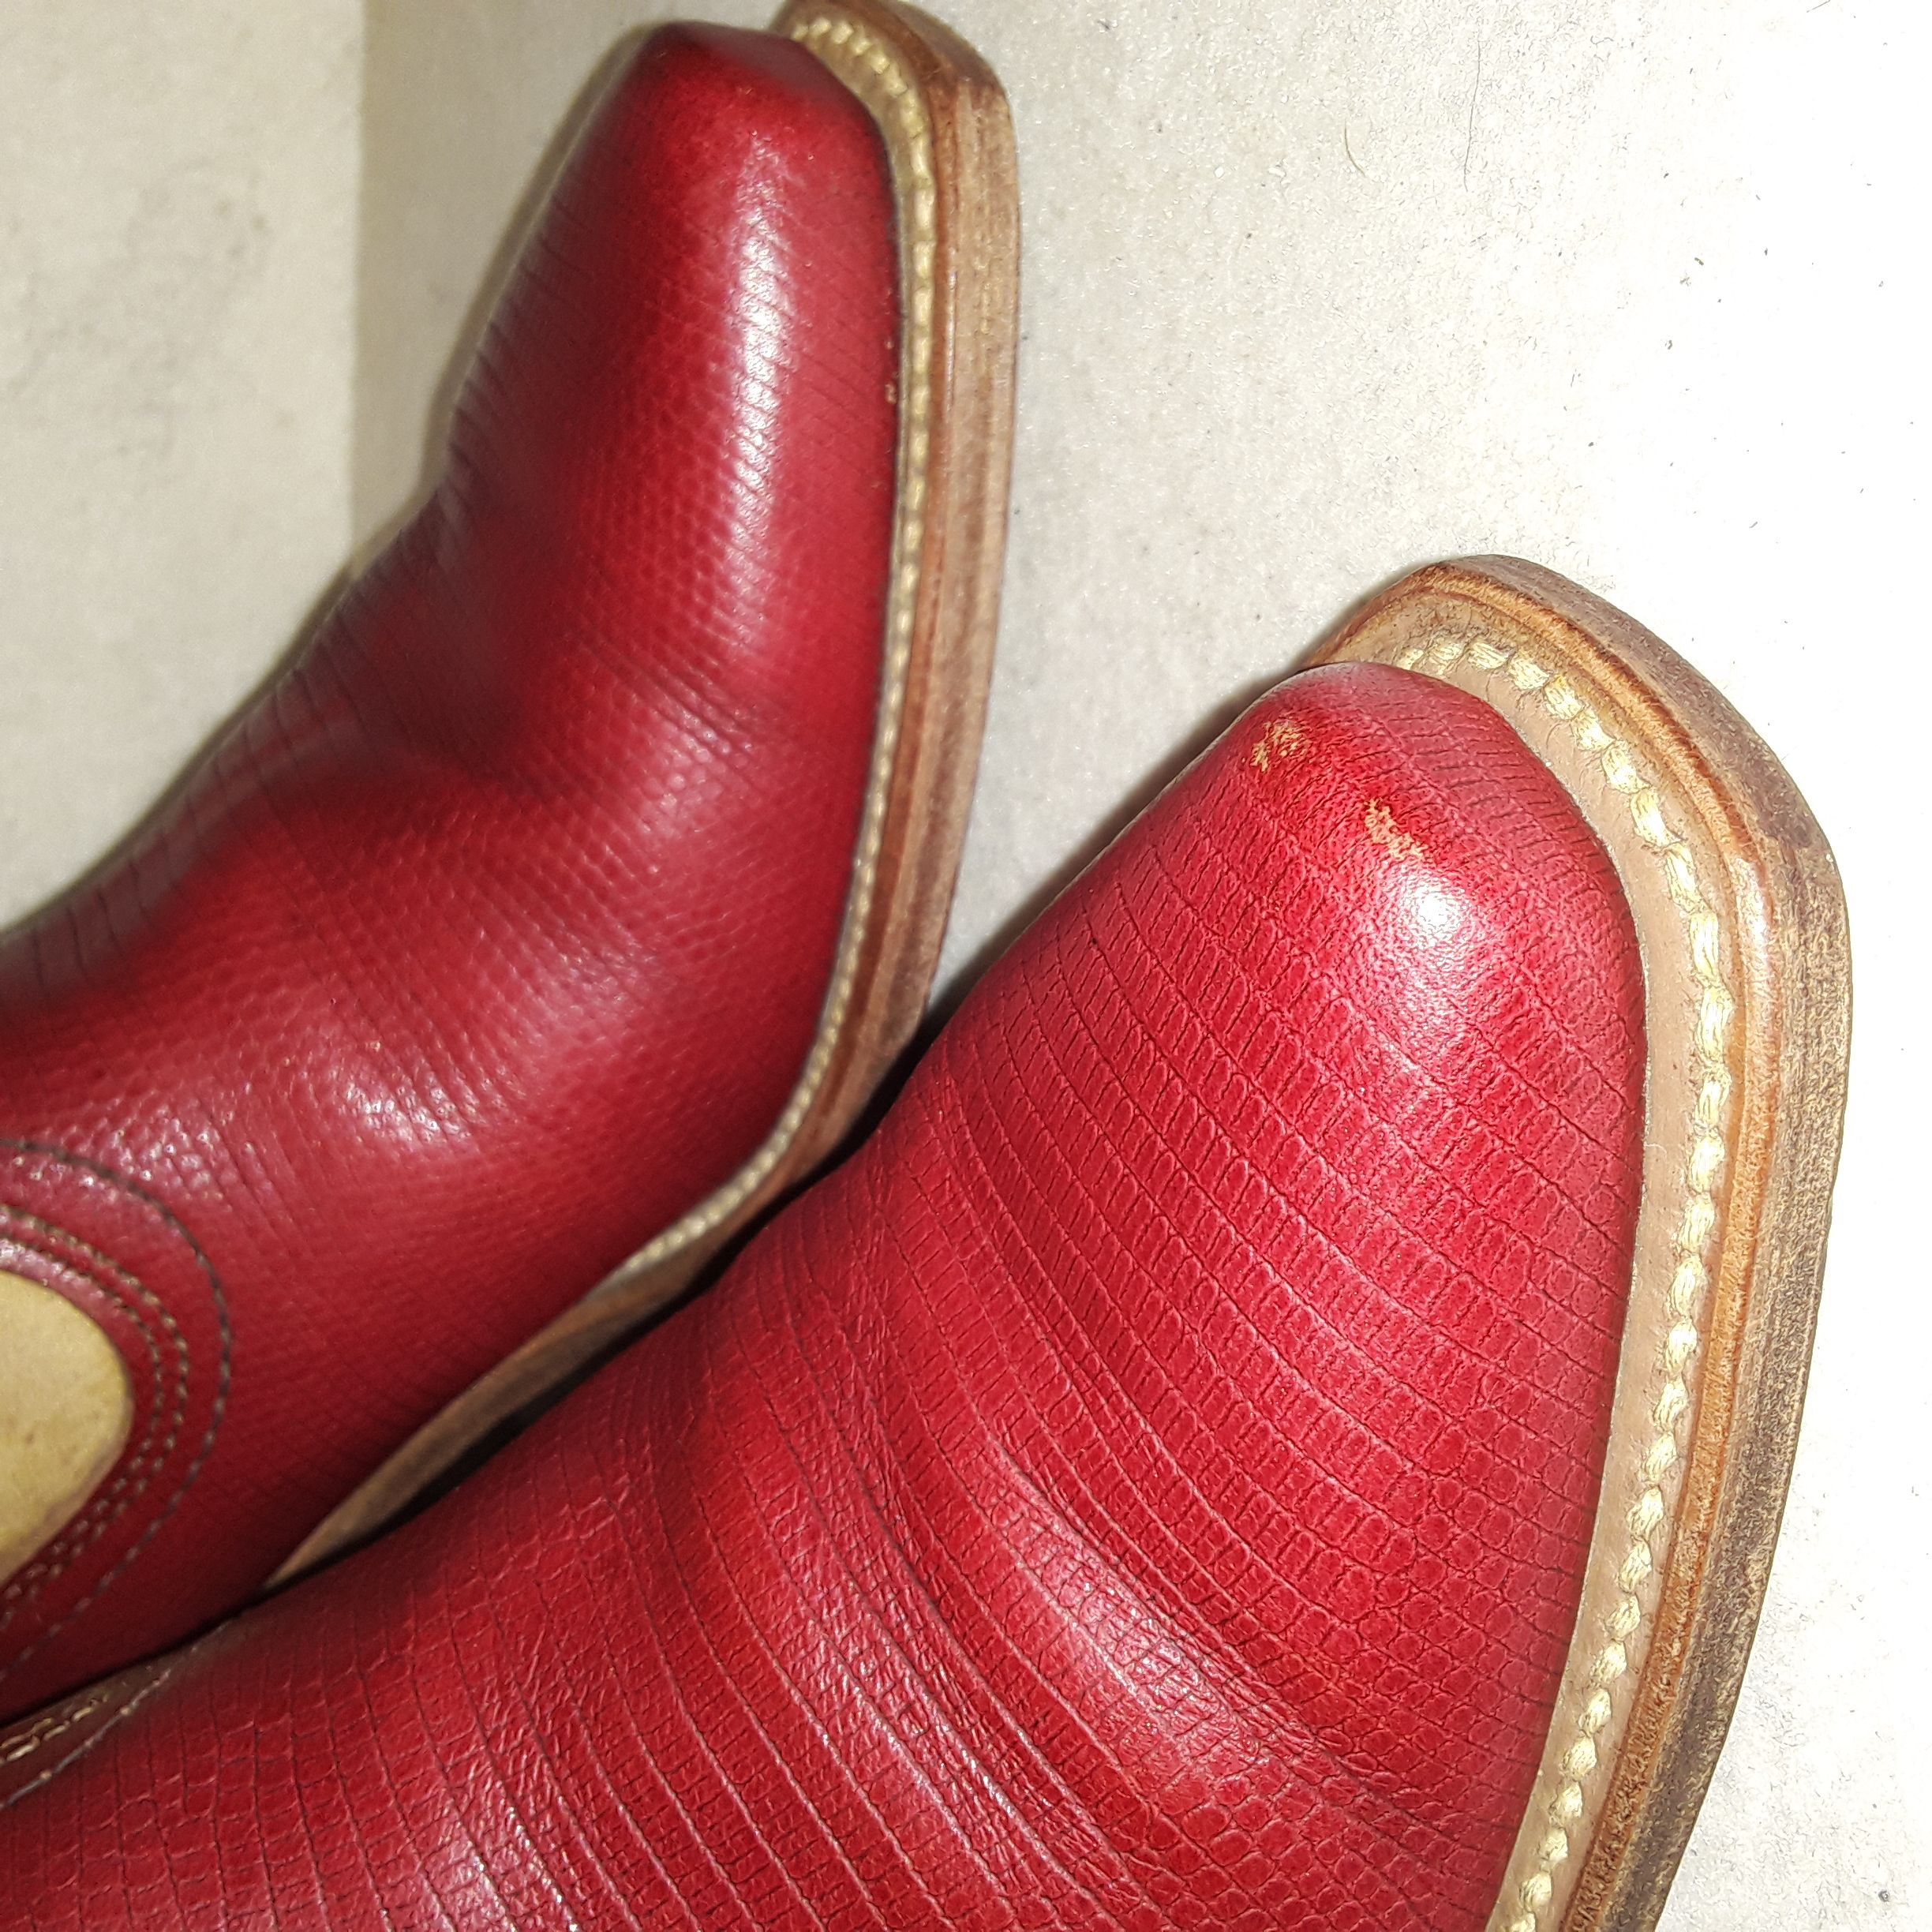 Vintage Vtg Frye Leather Cowgirl Western Boots Size 5.5 B USA Made Size US 5.5 / IT 35.5 - 4 Thumbnail